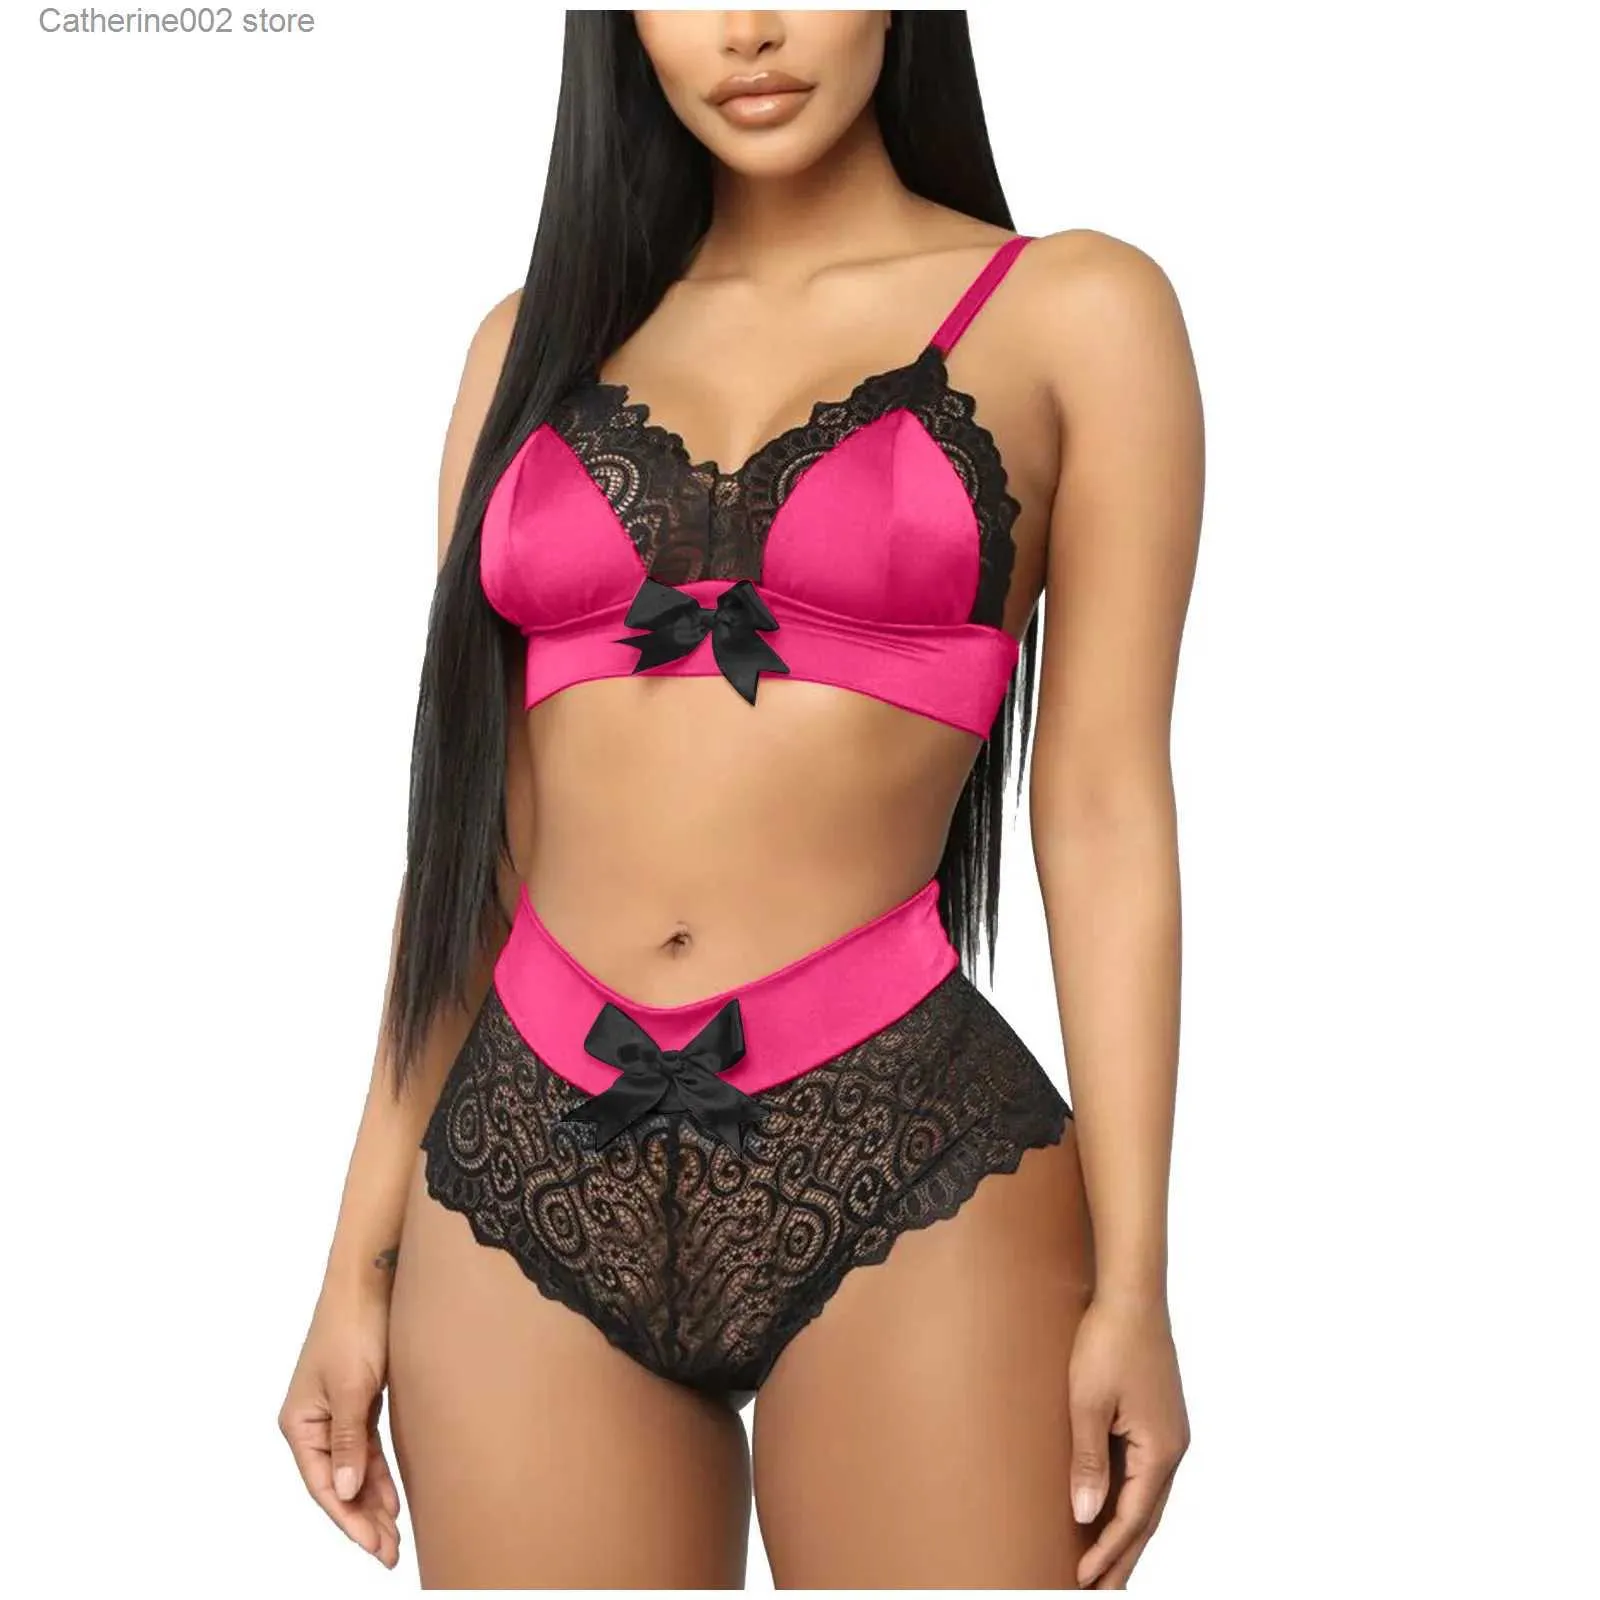 Plus Size Lace Bra And Sling Set Sexy And Naughty Lingerie For Women  T231027 From Catherine002, $3.18